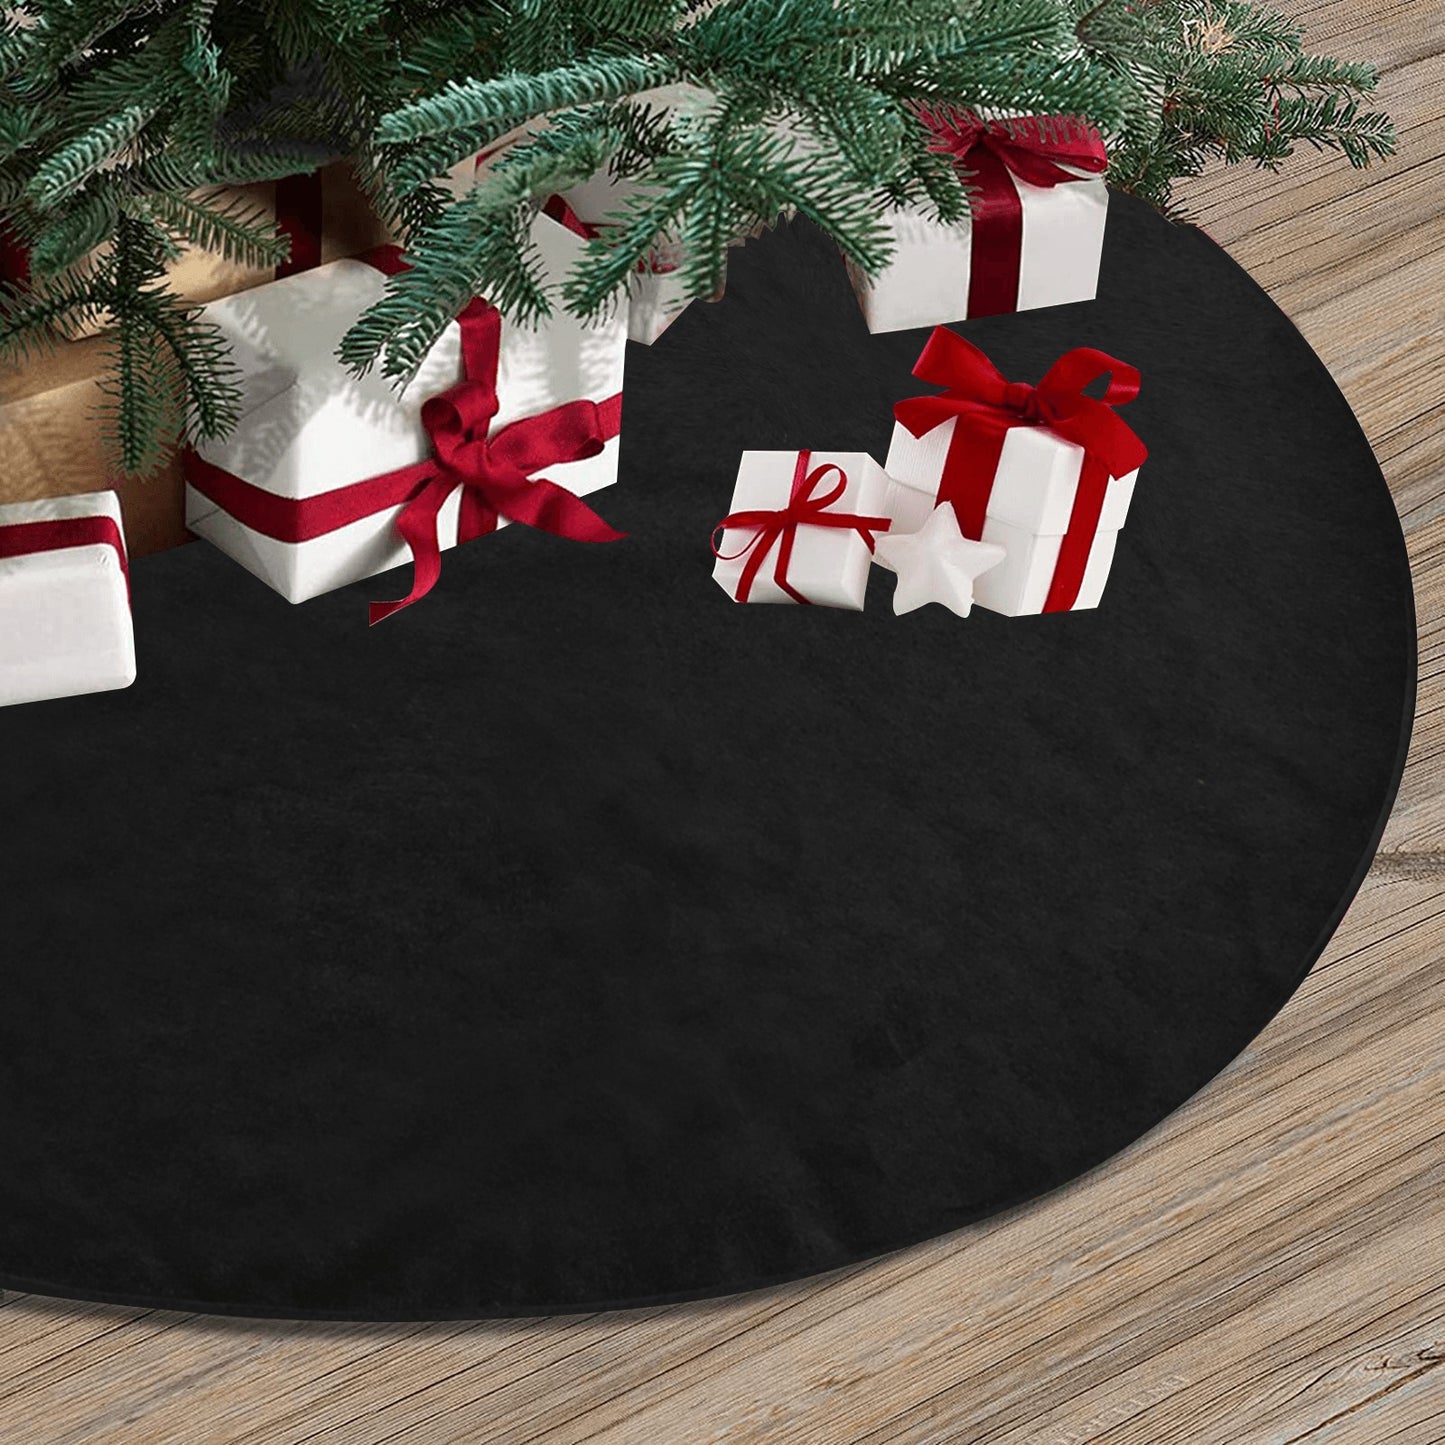 Black Halloween Christmas Tree Skirt, Solid Color Dark Grey Small Large Plain Stand Base Cover Goth Decor Decoration All Hallows Eve Party Starcove Fashion